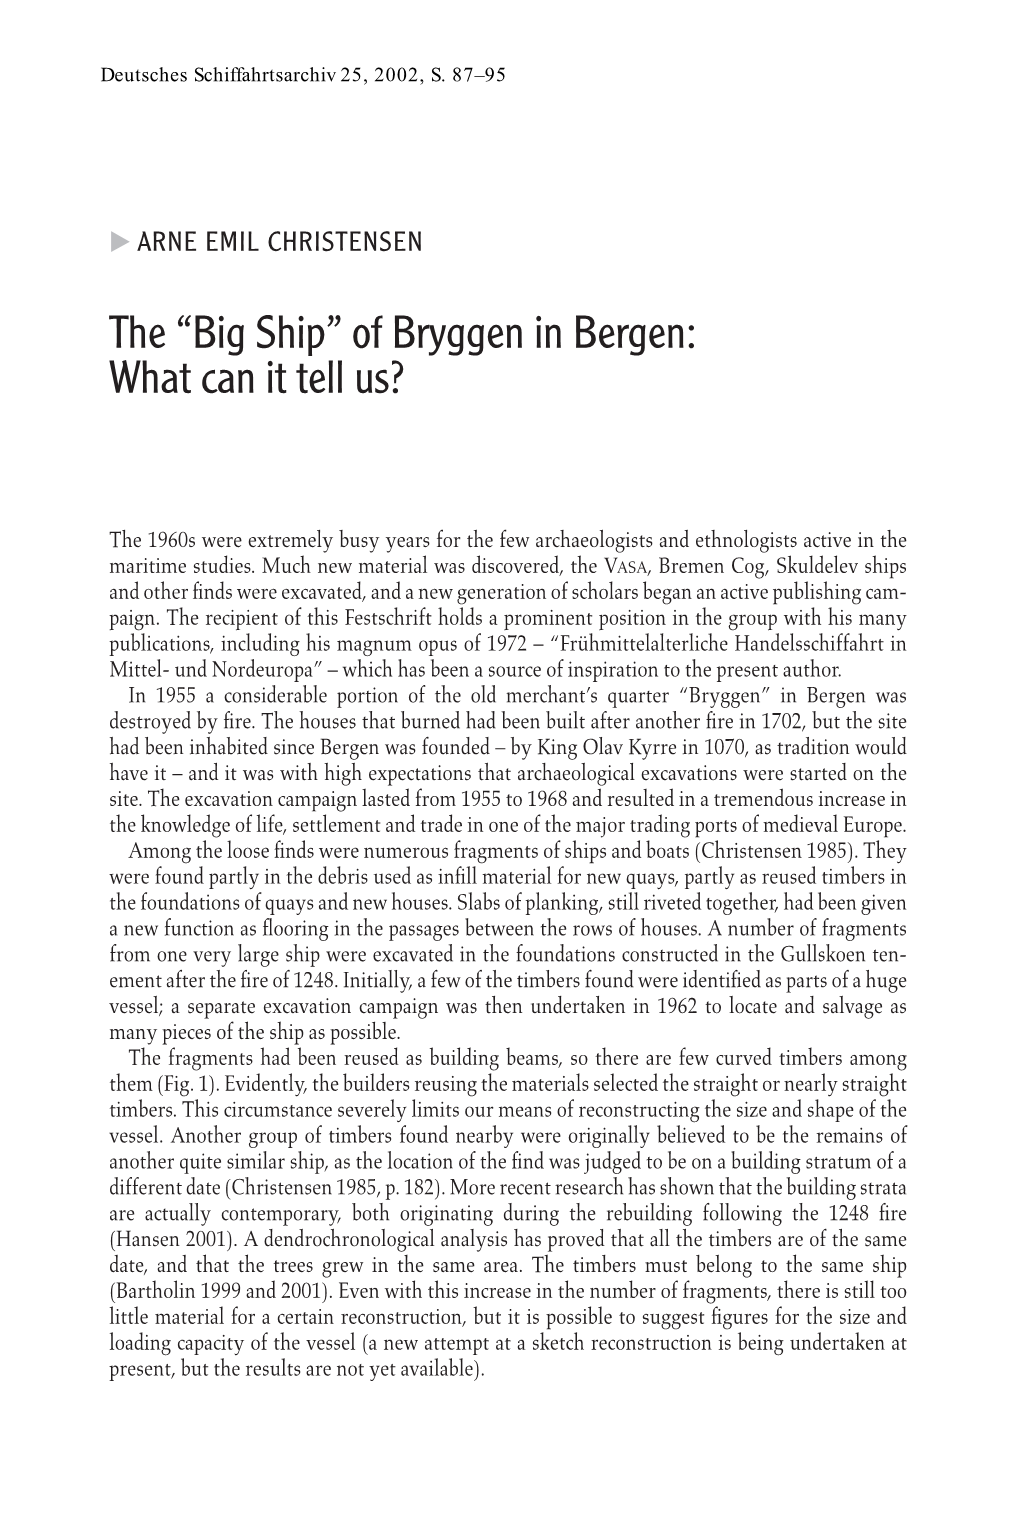 The “Big Ship” of Bryggen in Bergen: What Can It Tell Us?